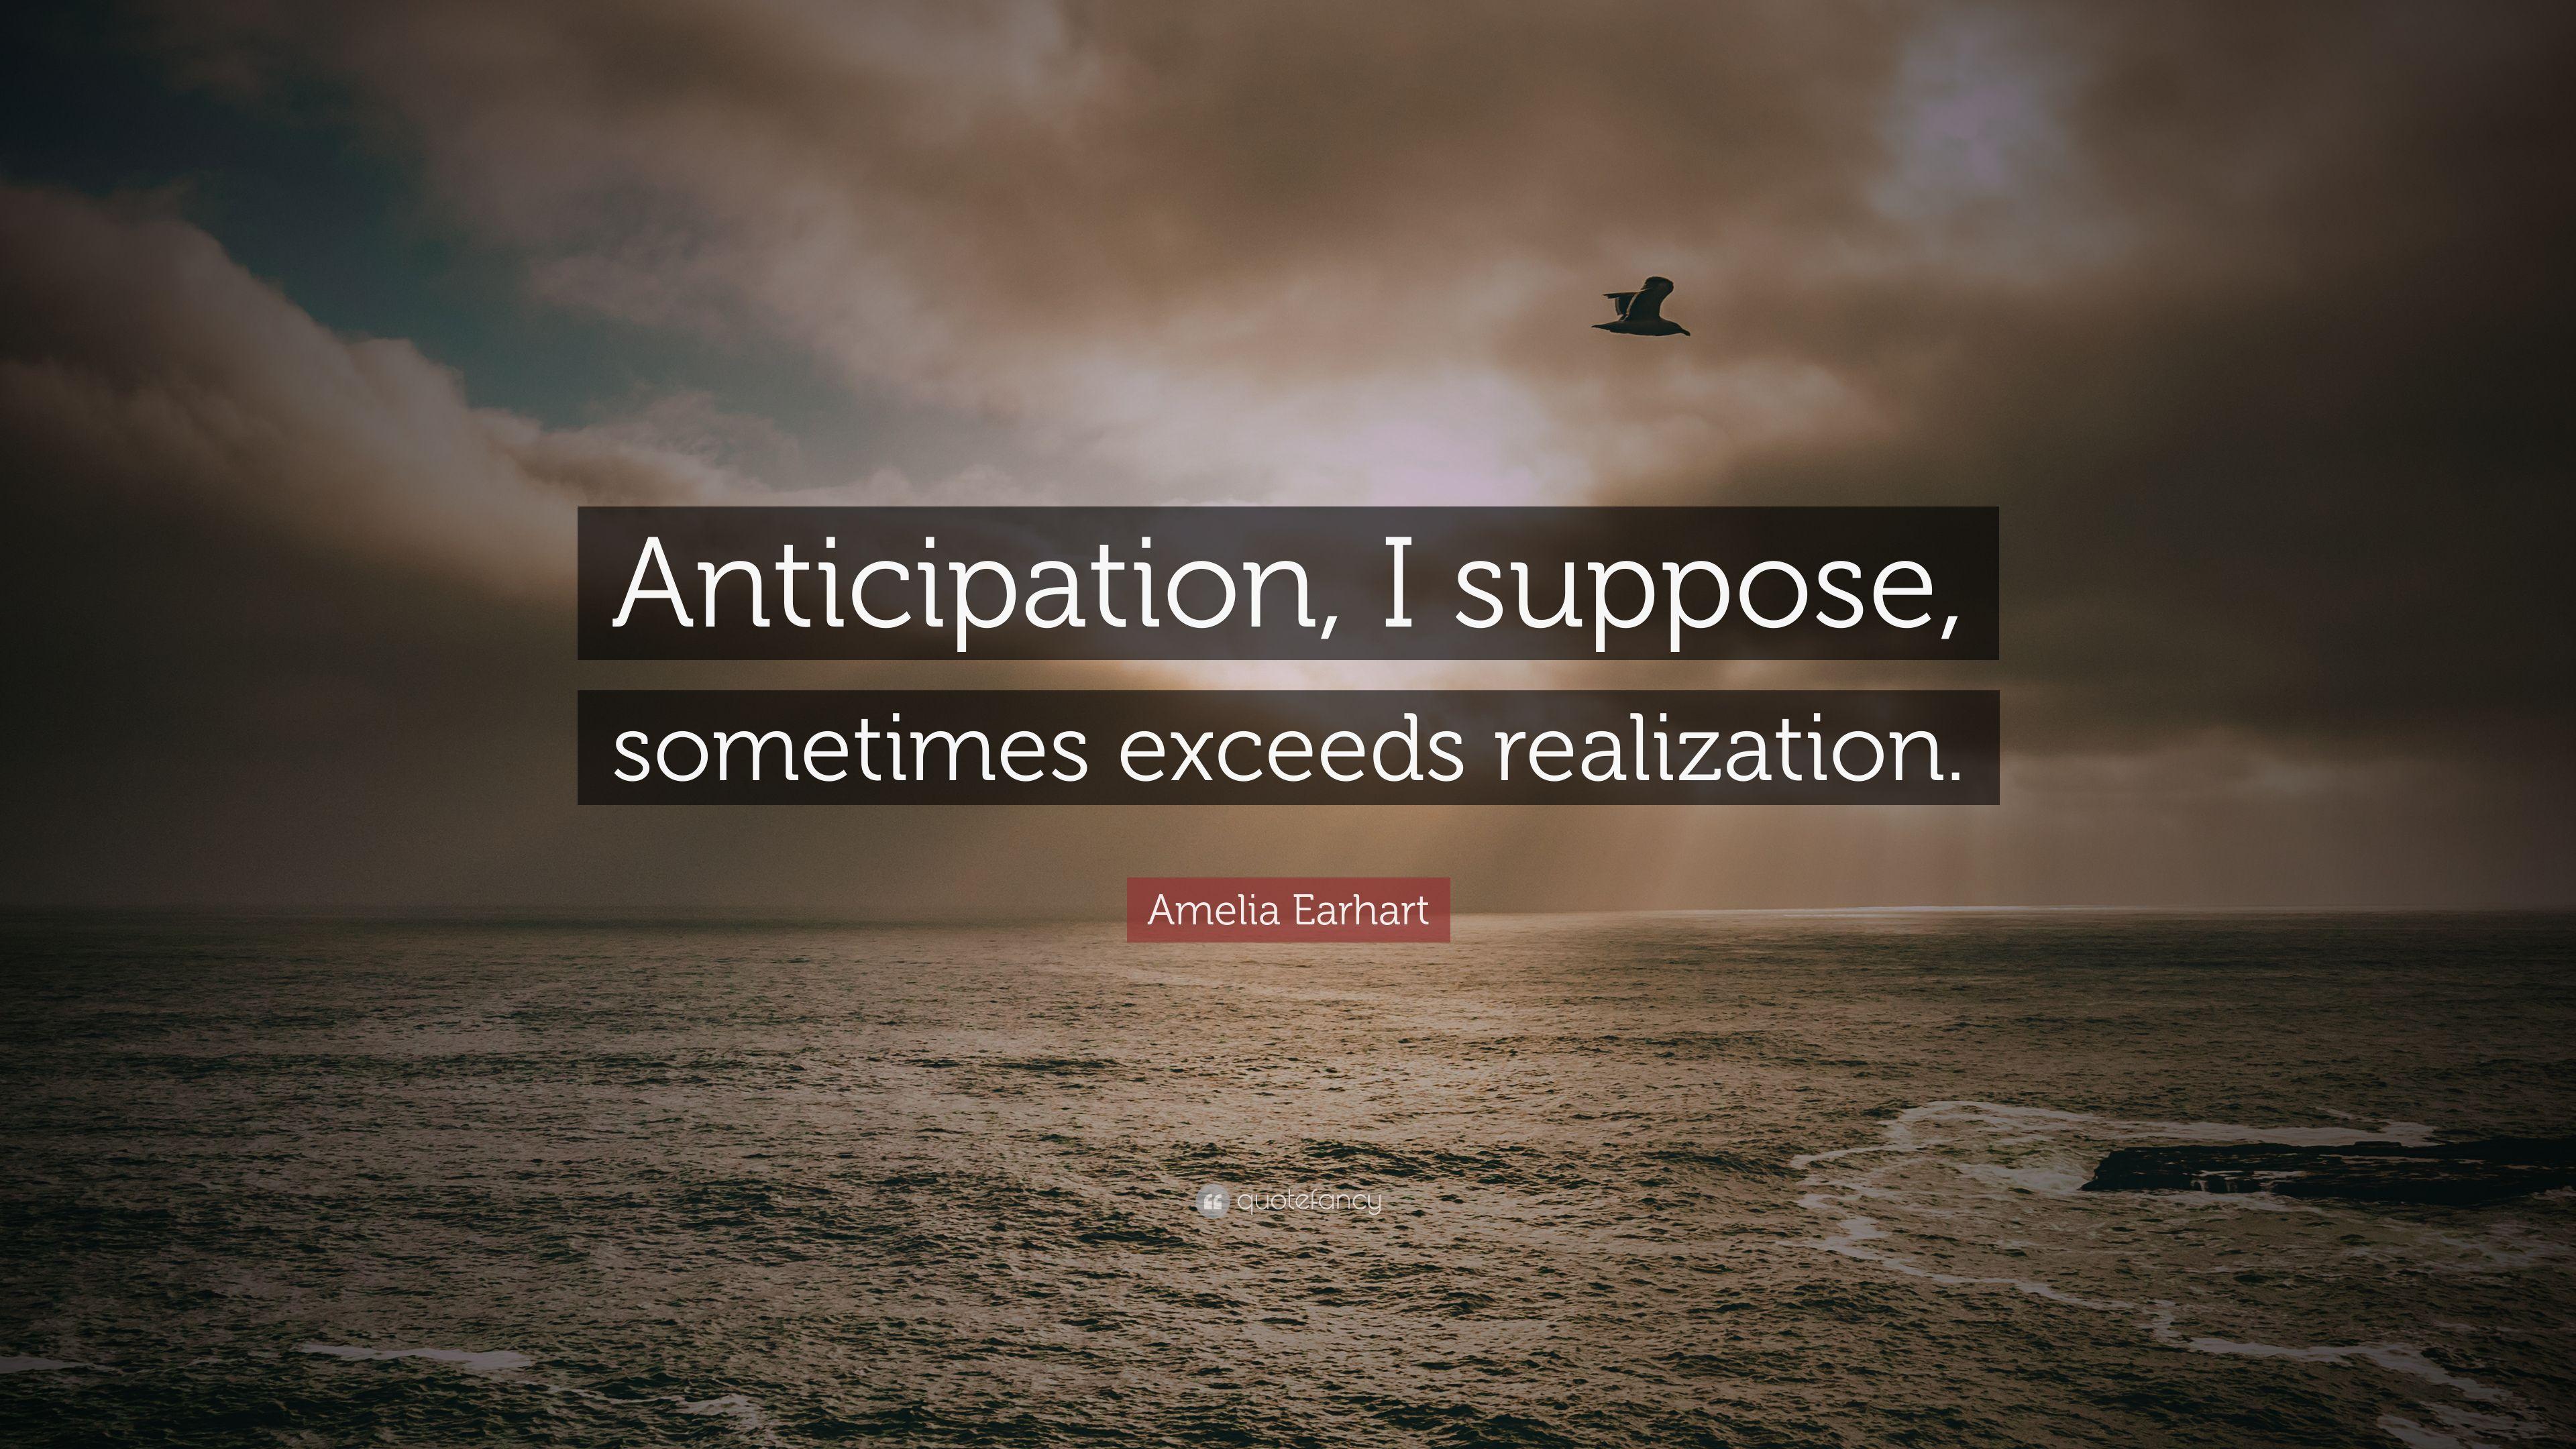 Amelia Earhart Quote: “Anticipation, I suppose, sometimes exceeds